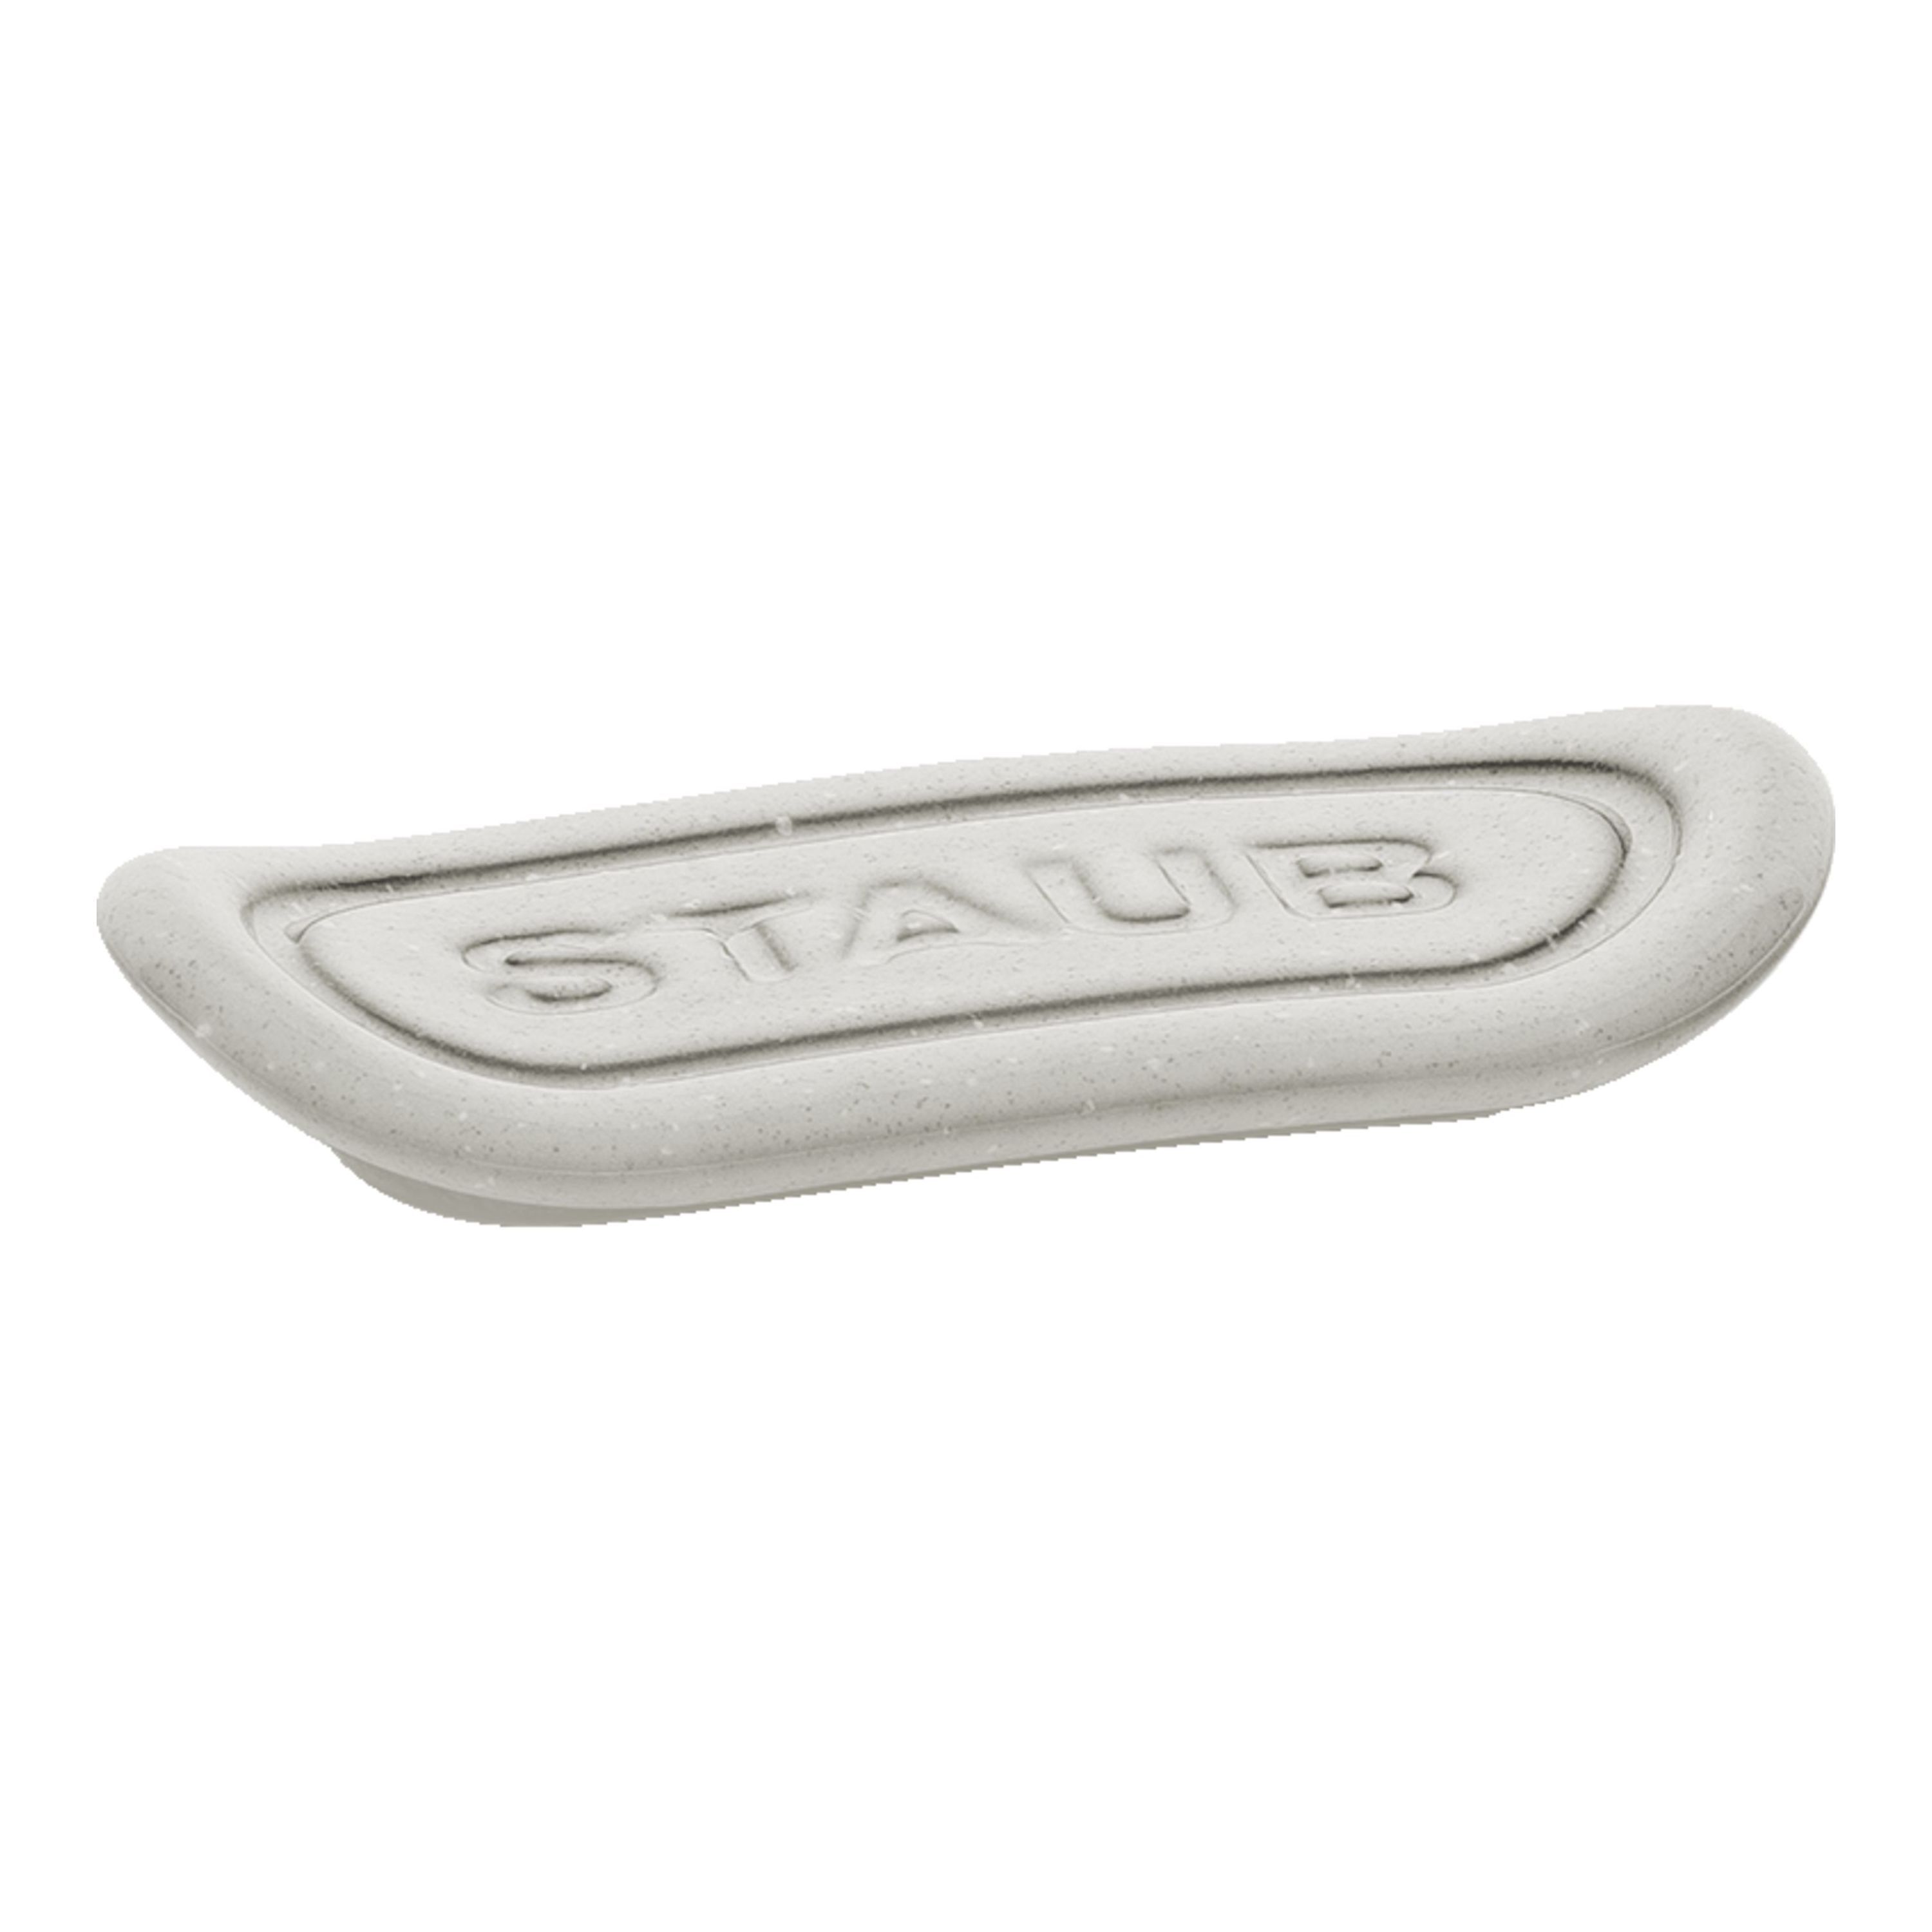 Staub Dining Line Repose couverts, 4-pcs, Truffe blanche